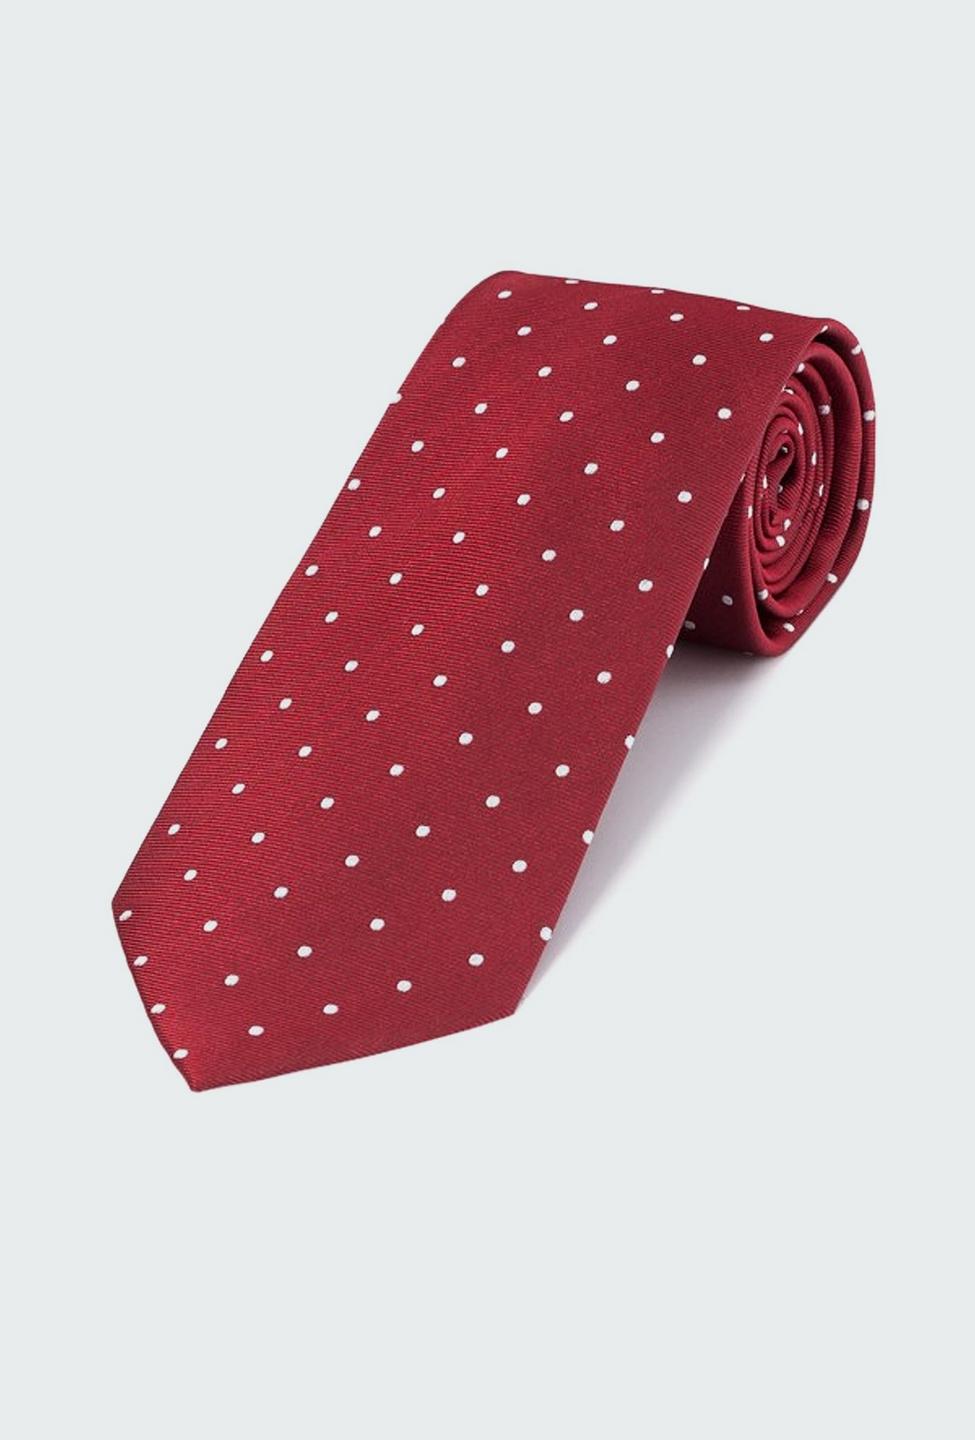 Red tie - Pattern Design from Indochino Collection